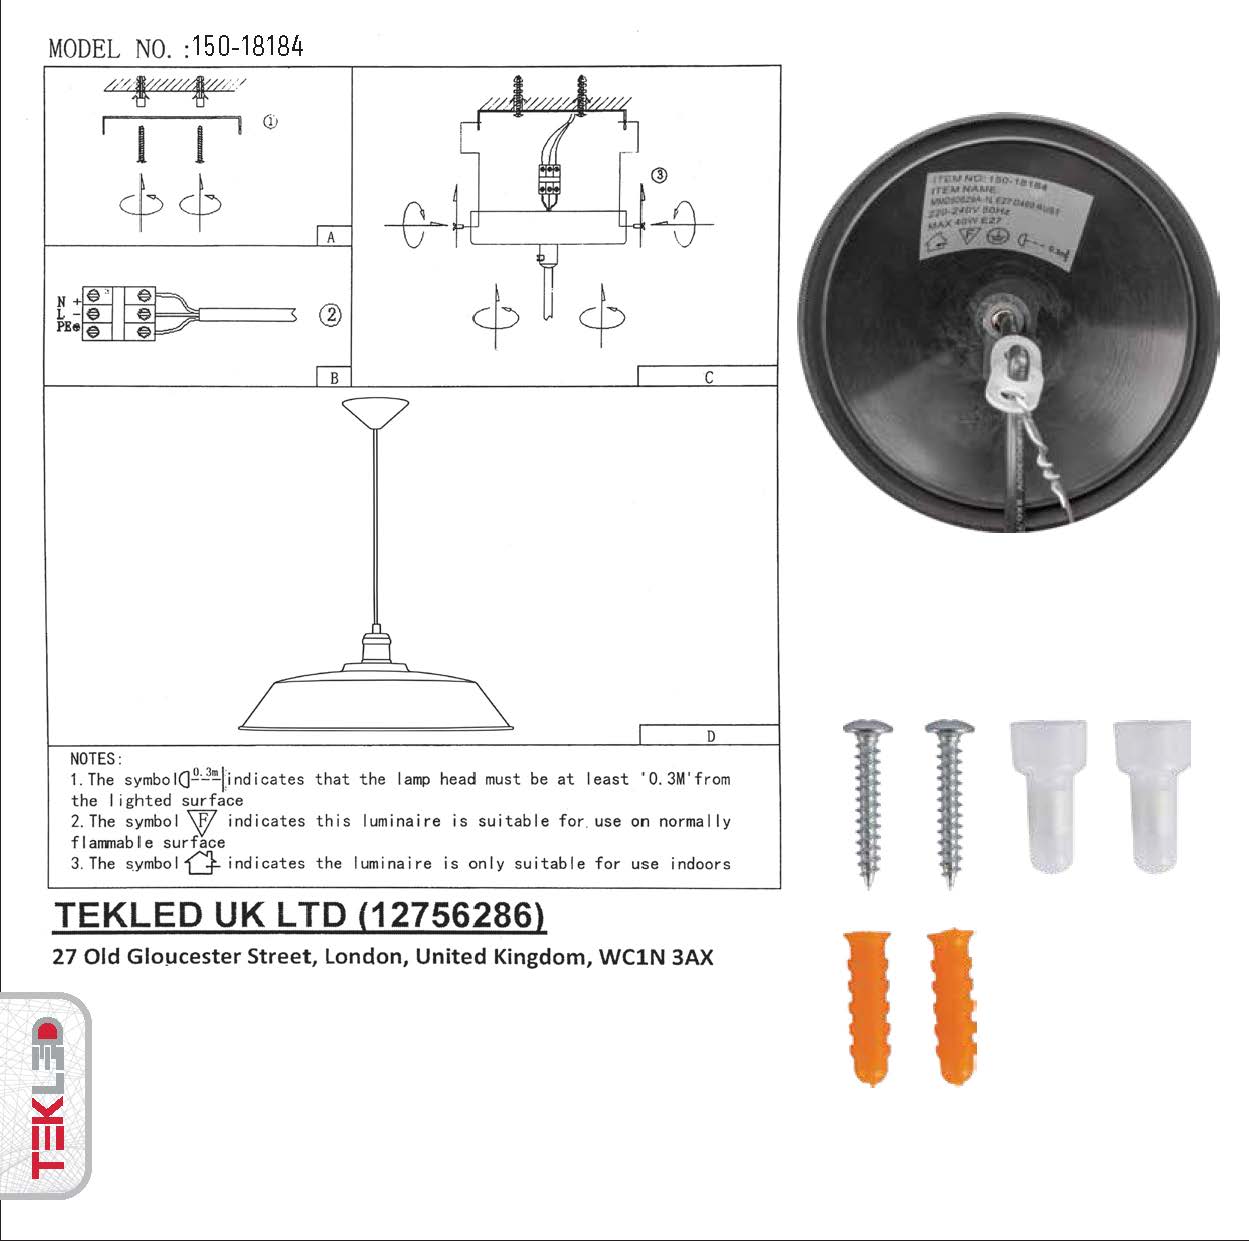 User manual and box content of rusty brown metal step flat pendant light l with e27 fitting